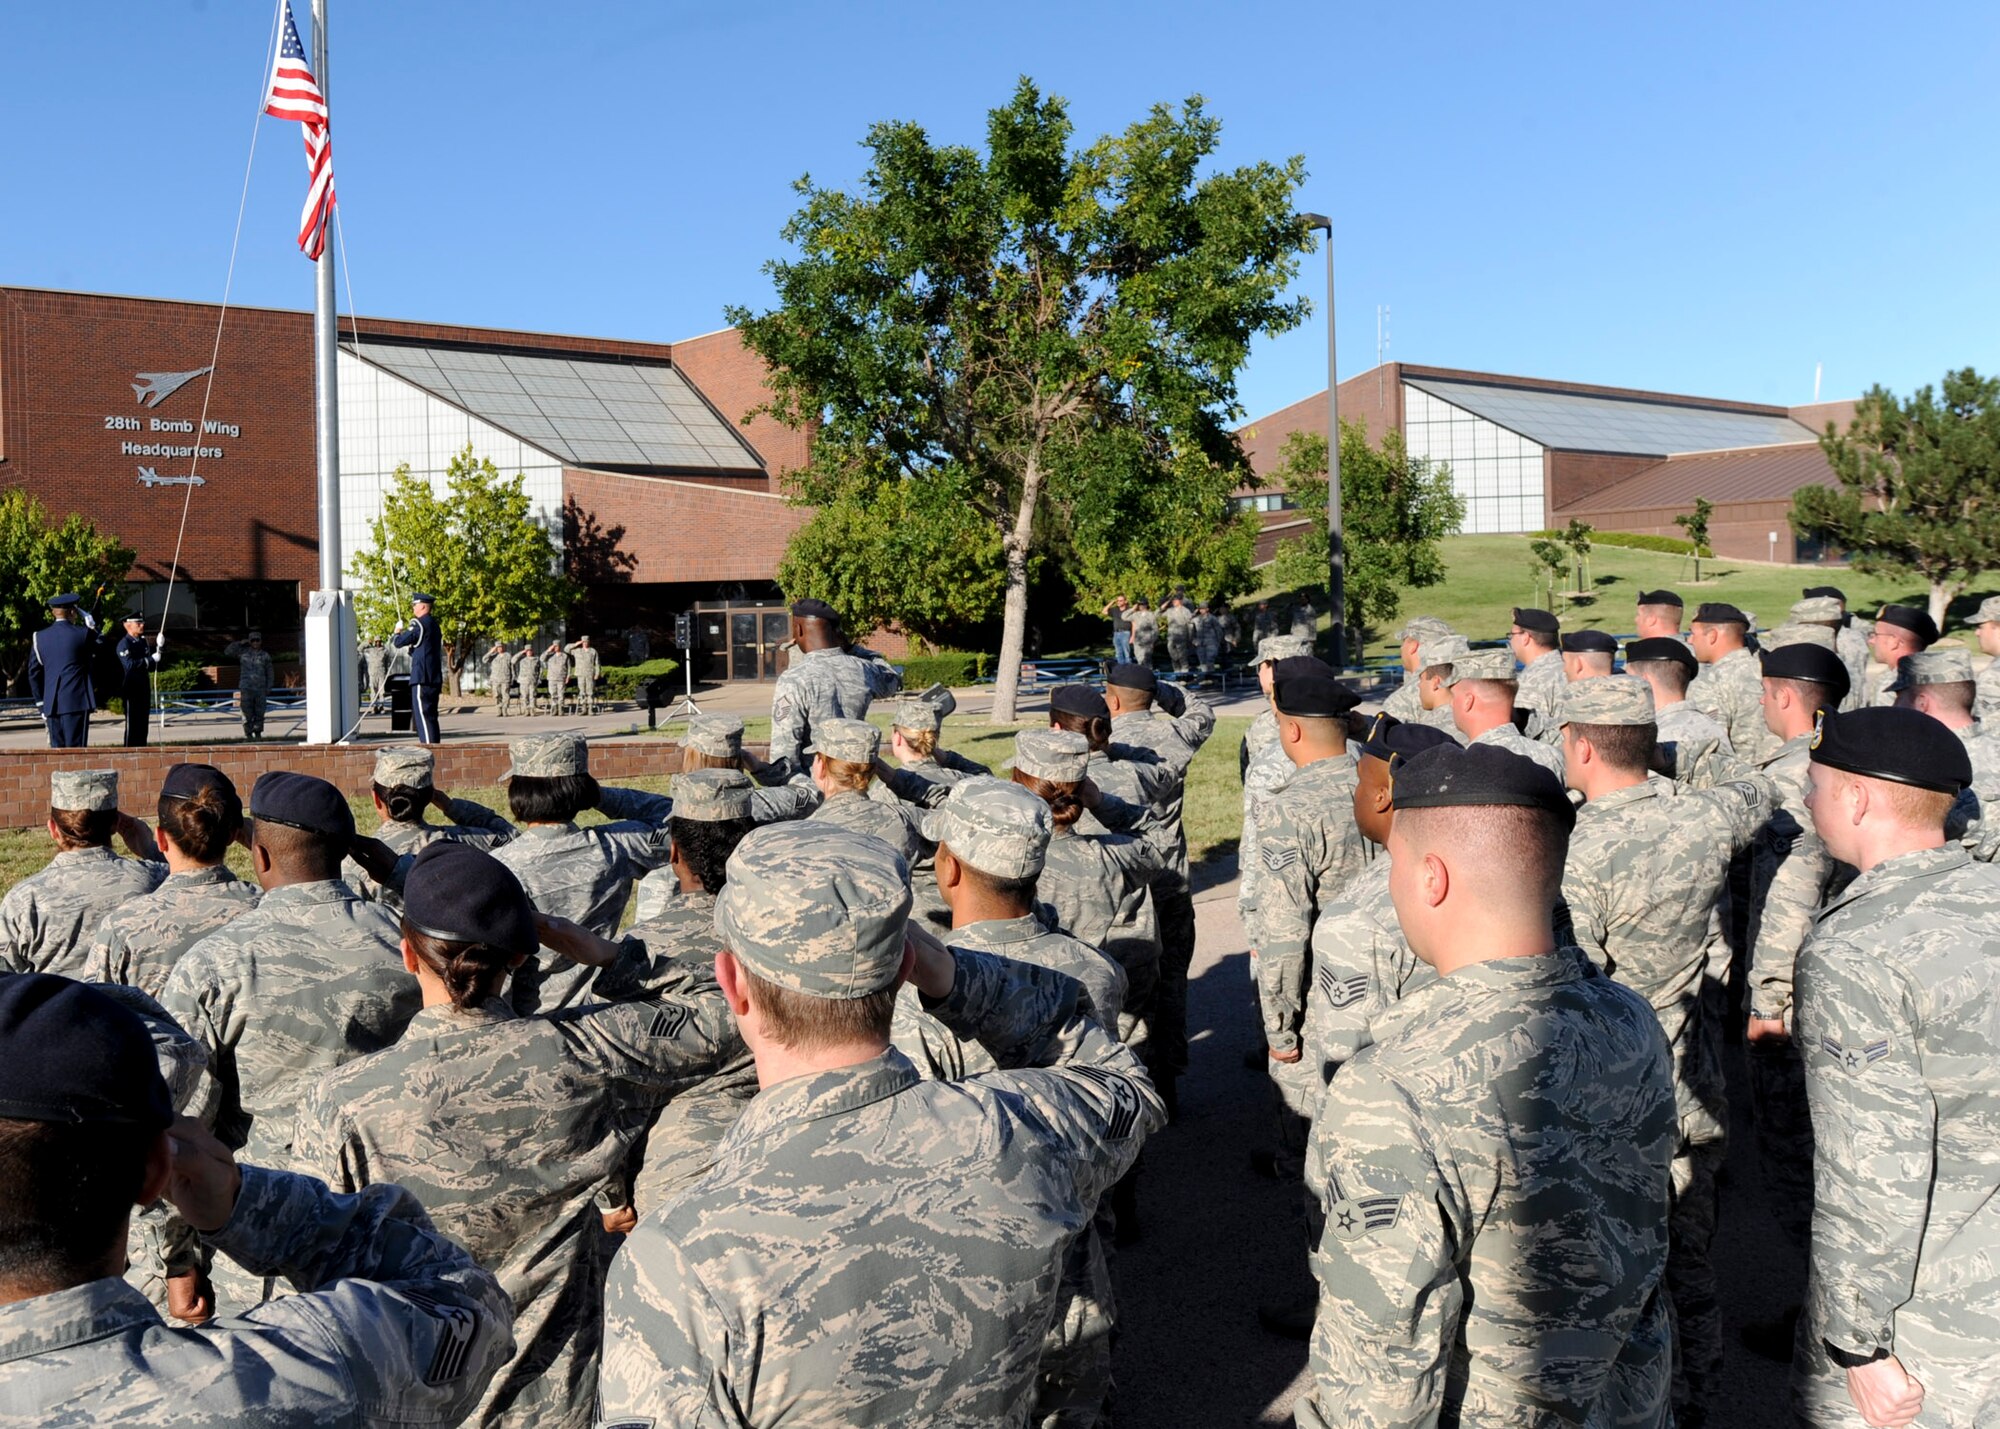 Airmen render salutes as the U.S. flag is raised to full staff then lowered during the POW/MIA retreat ceremony in front of the 28th Bomb Wing Headquarters building at Ellsworth Air Force Base, S.D., Sept. 20, 2013. The ceremony honored servicemembers listed as missing in action or served as a prisoner of war – recognizing the sacrifices they’ve made for their country. (U.S. Air Force photo by Airman 1st Class Anania Tekurio/Released) 